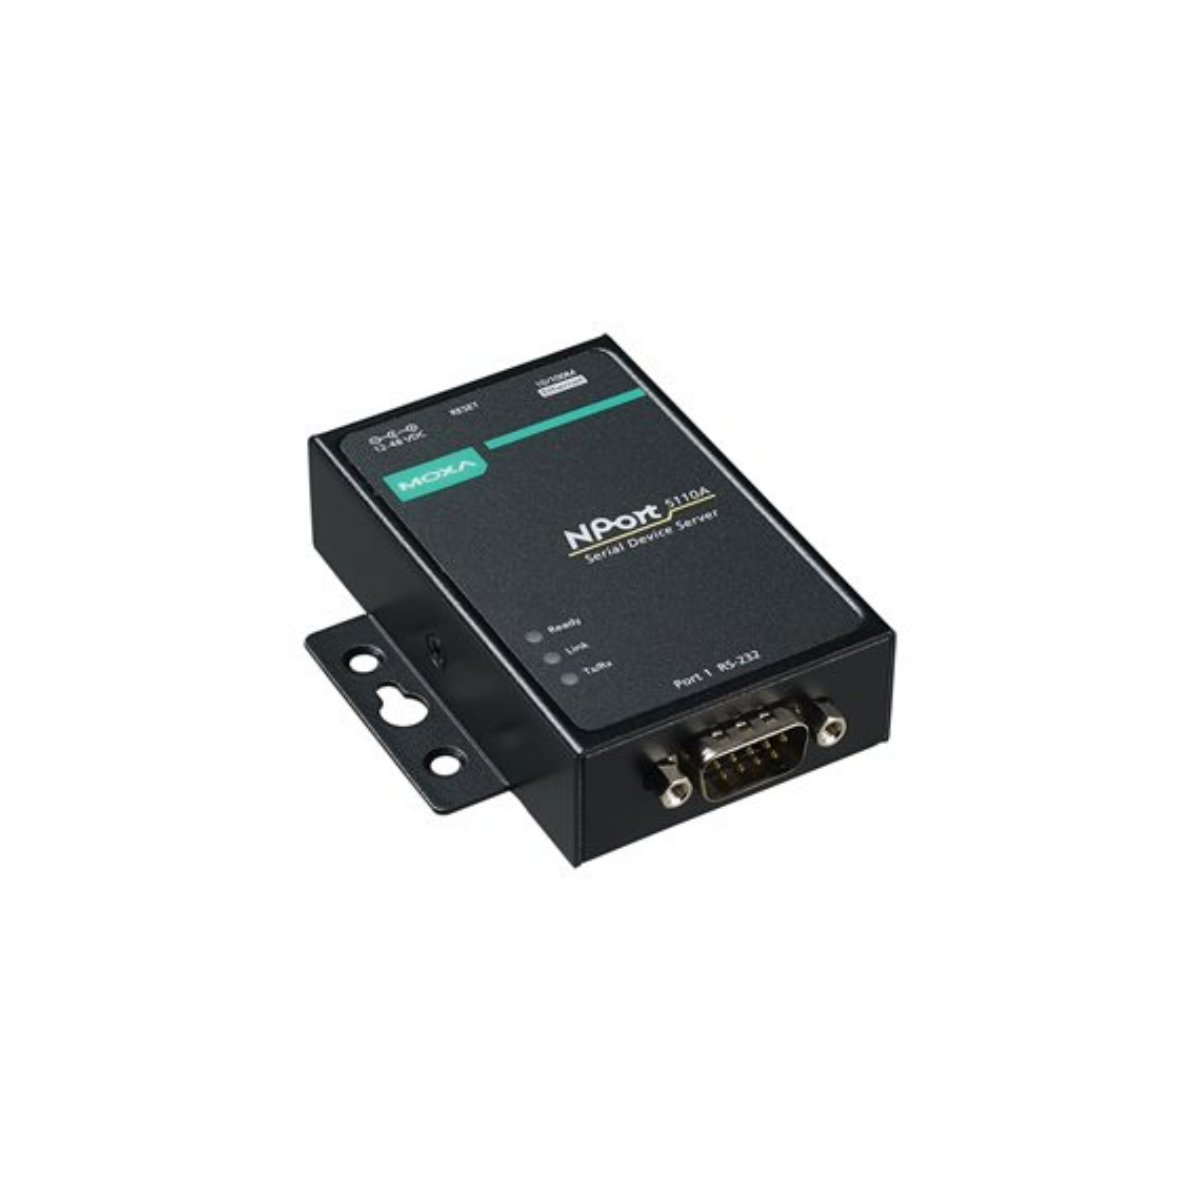 Moxa NPort 5110A 1-Port RS-232 Device Server